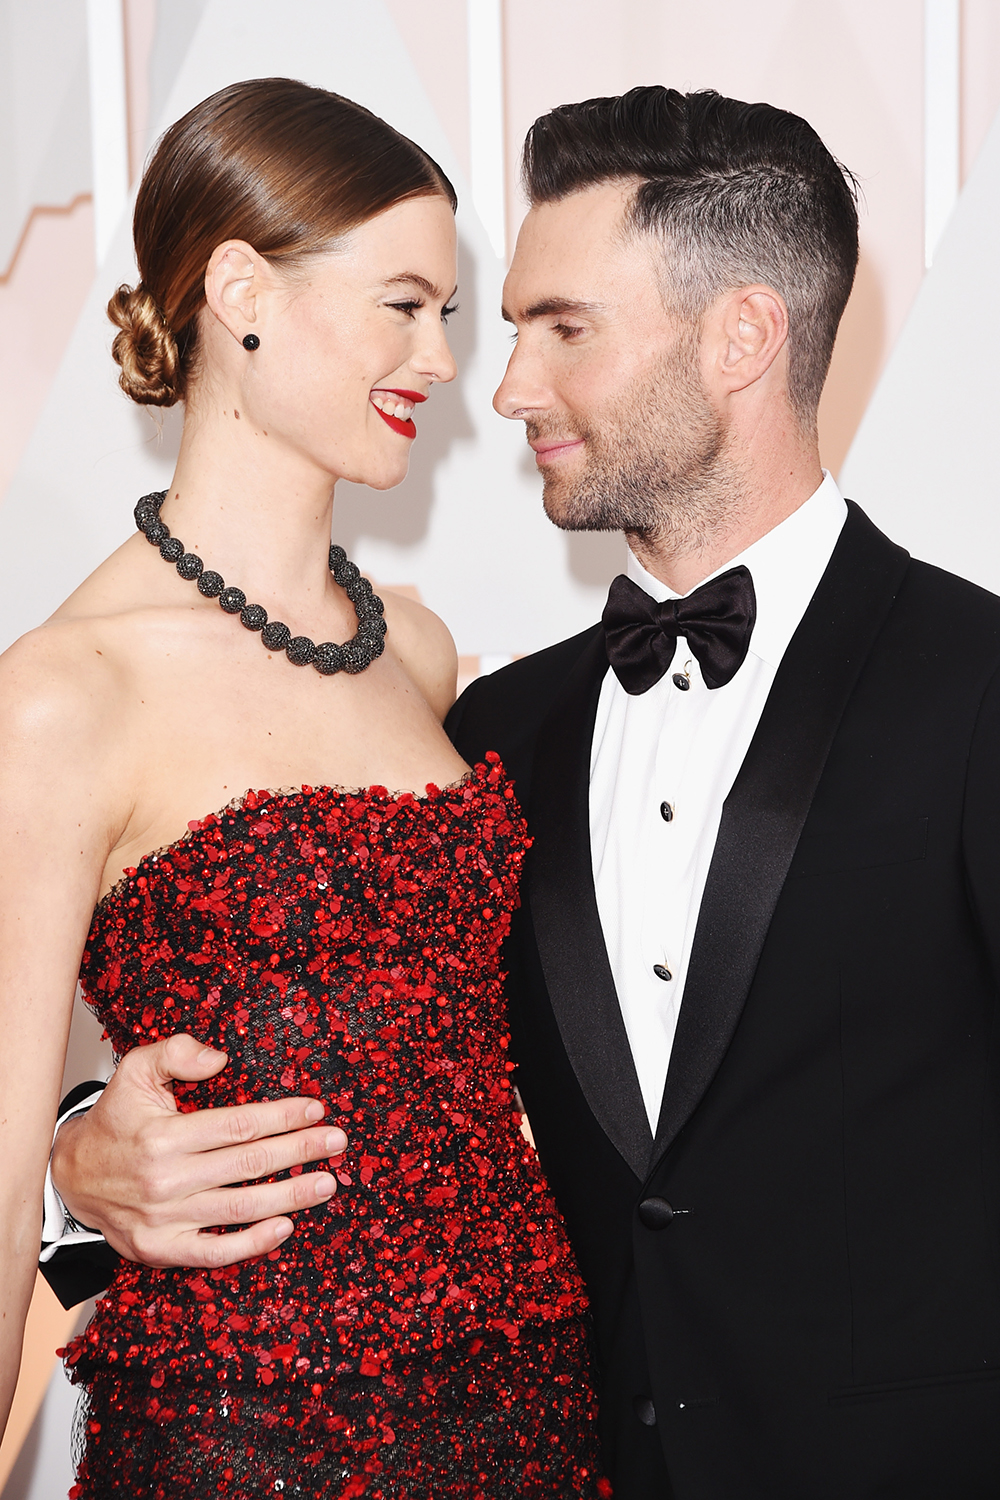 Adam Levine was a notorious Victoria Secret modelizer, before he settled down and married VS Angel Behati Prinsloo in 2014.